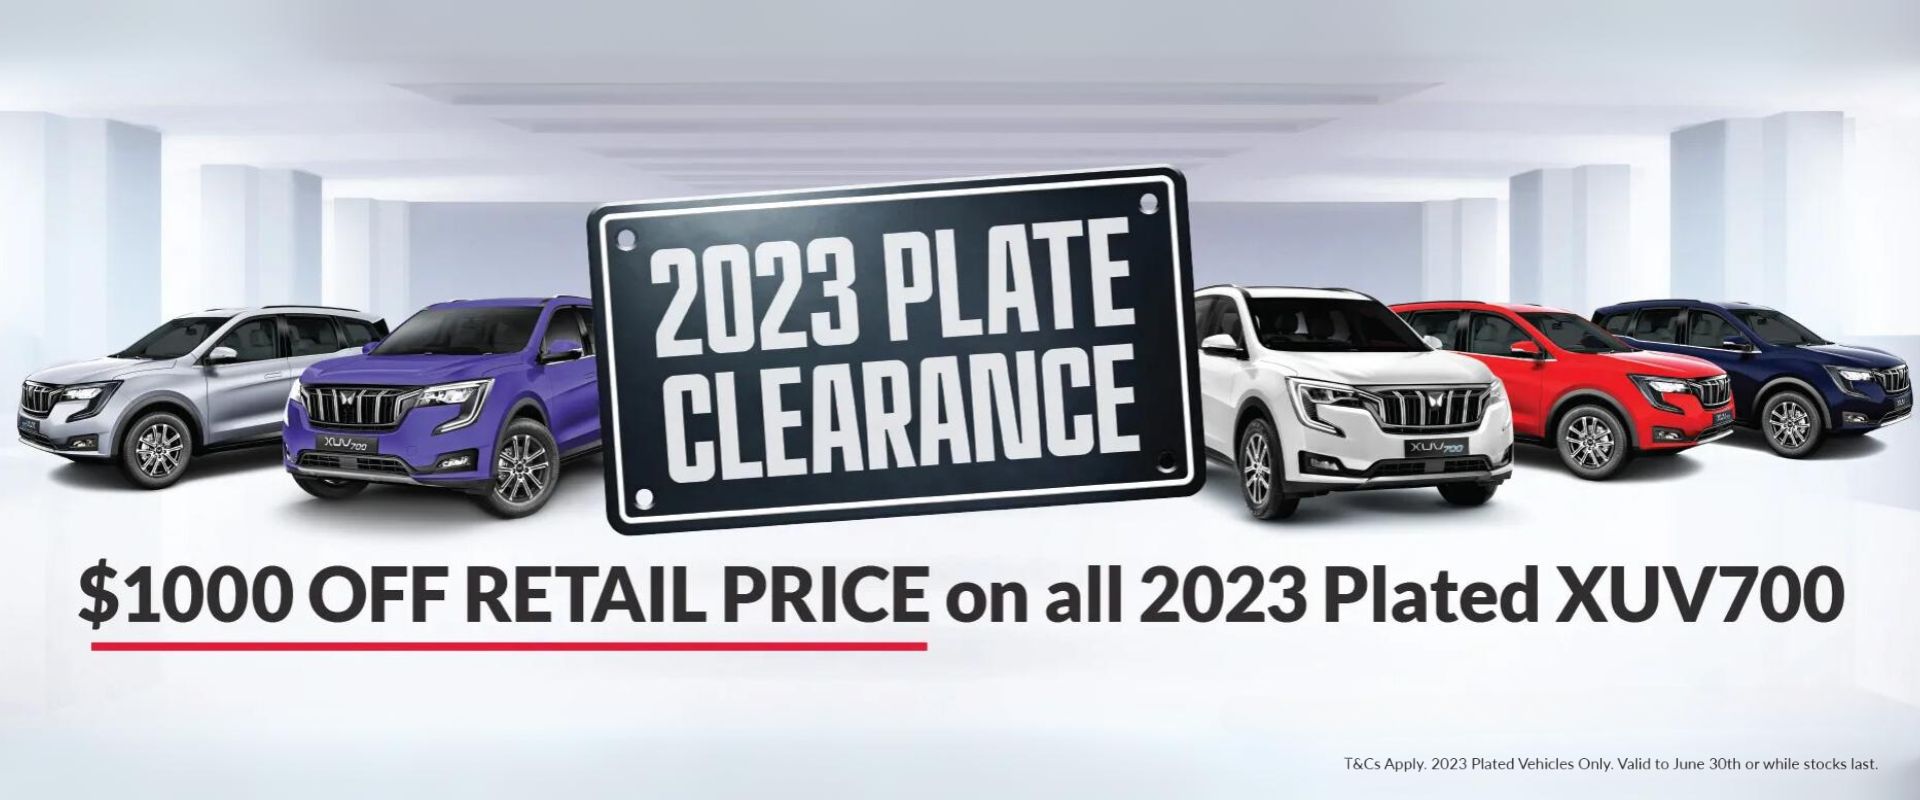 2023 Plate Clearance $1000 OFF RETAIL PRICE on all 2023 Plated XUV700